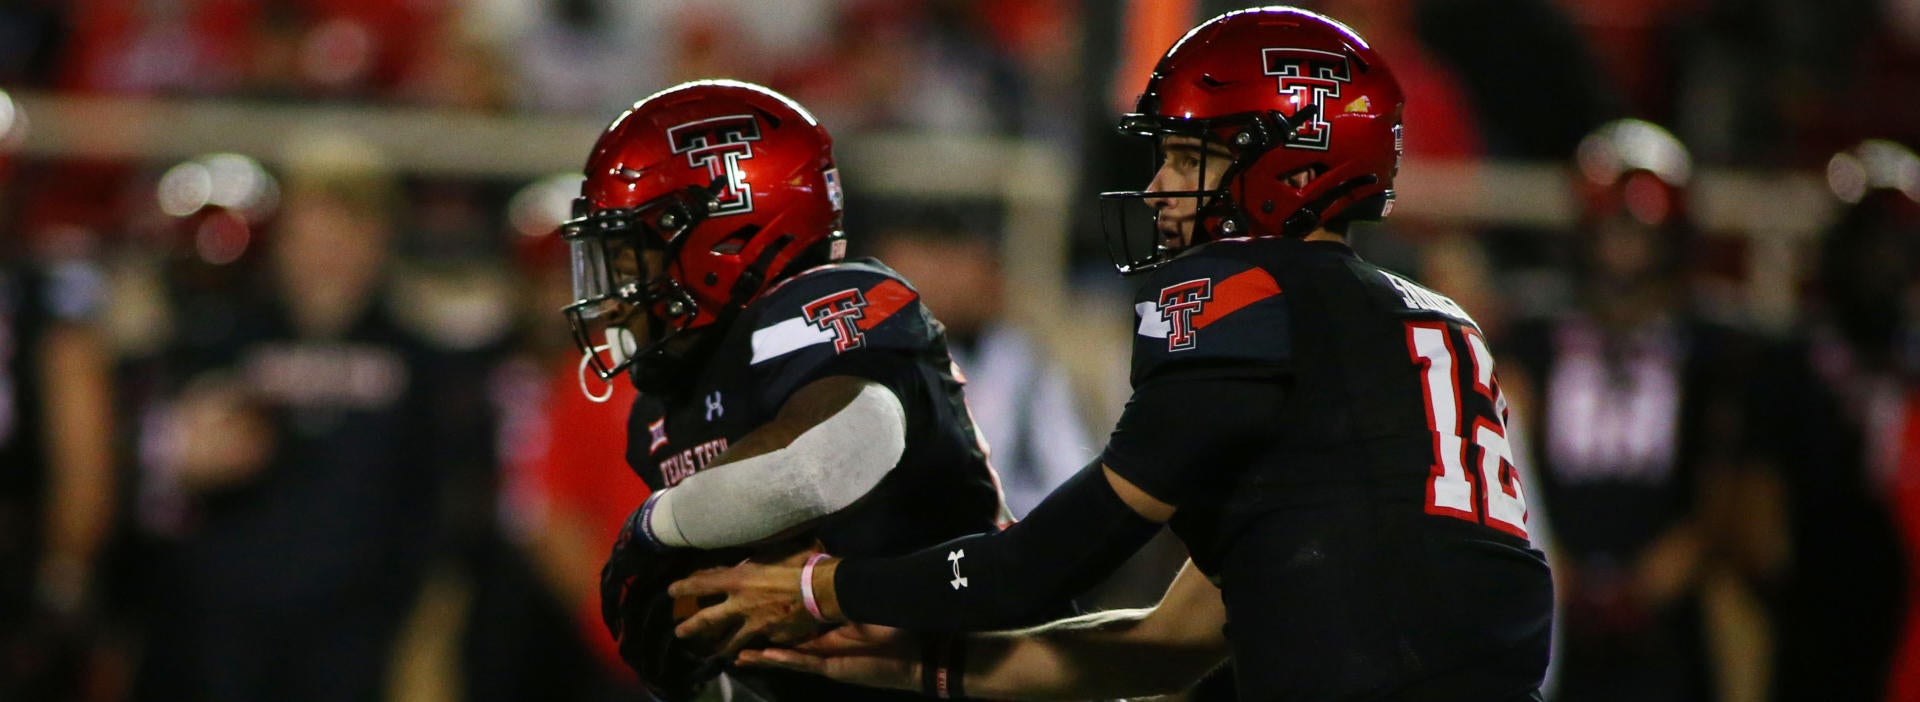 2023 Texas Tech Red Raiders win total betting strategy: Joey McGuire's team should again have firepower to compete in Big 12